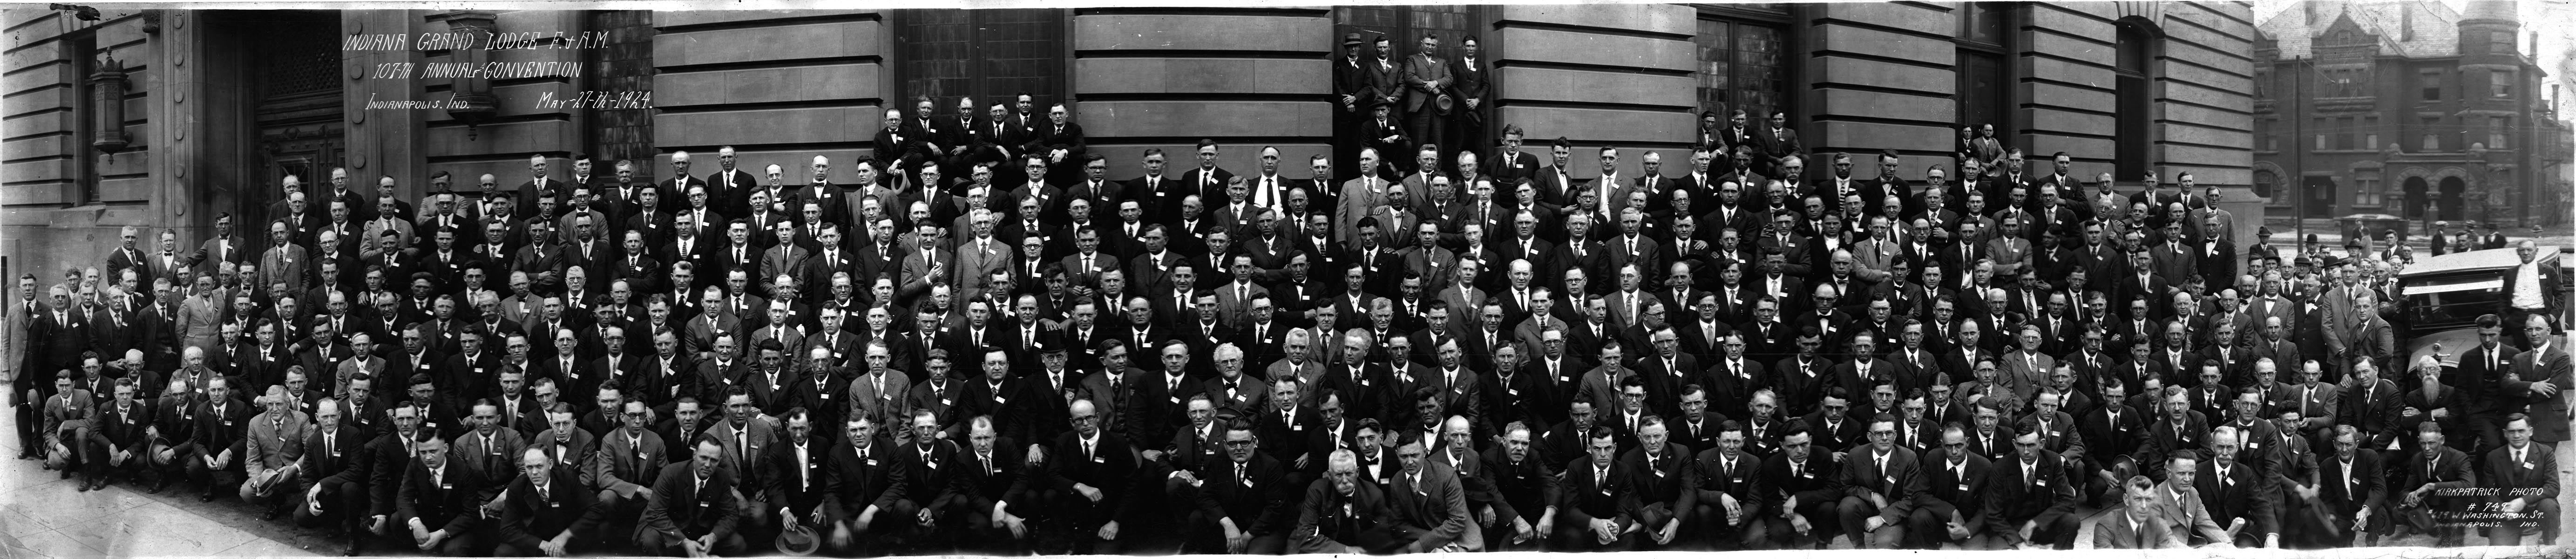 107th annual convention of the Indiana Grand Lodge of the Free and Accepted Masons, in Indianapolis, Indiana, May 27th, 1924.  Photo taken with a Cirkut #10 panoramic camera, original size is approximately 10" by 45" (these kinds of pictures were informally referred to as "yard-longs"). View full size.